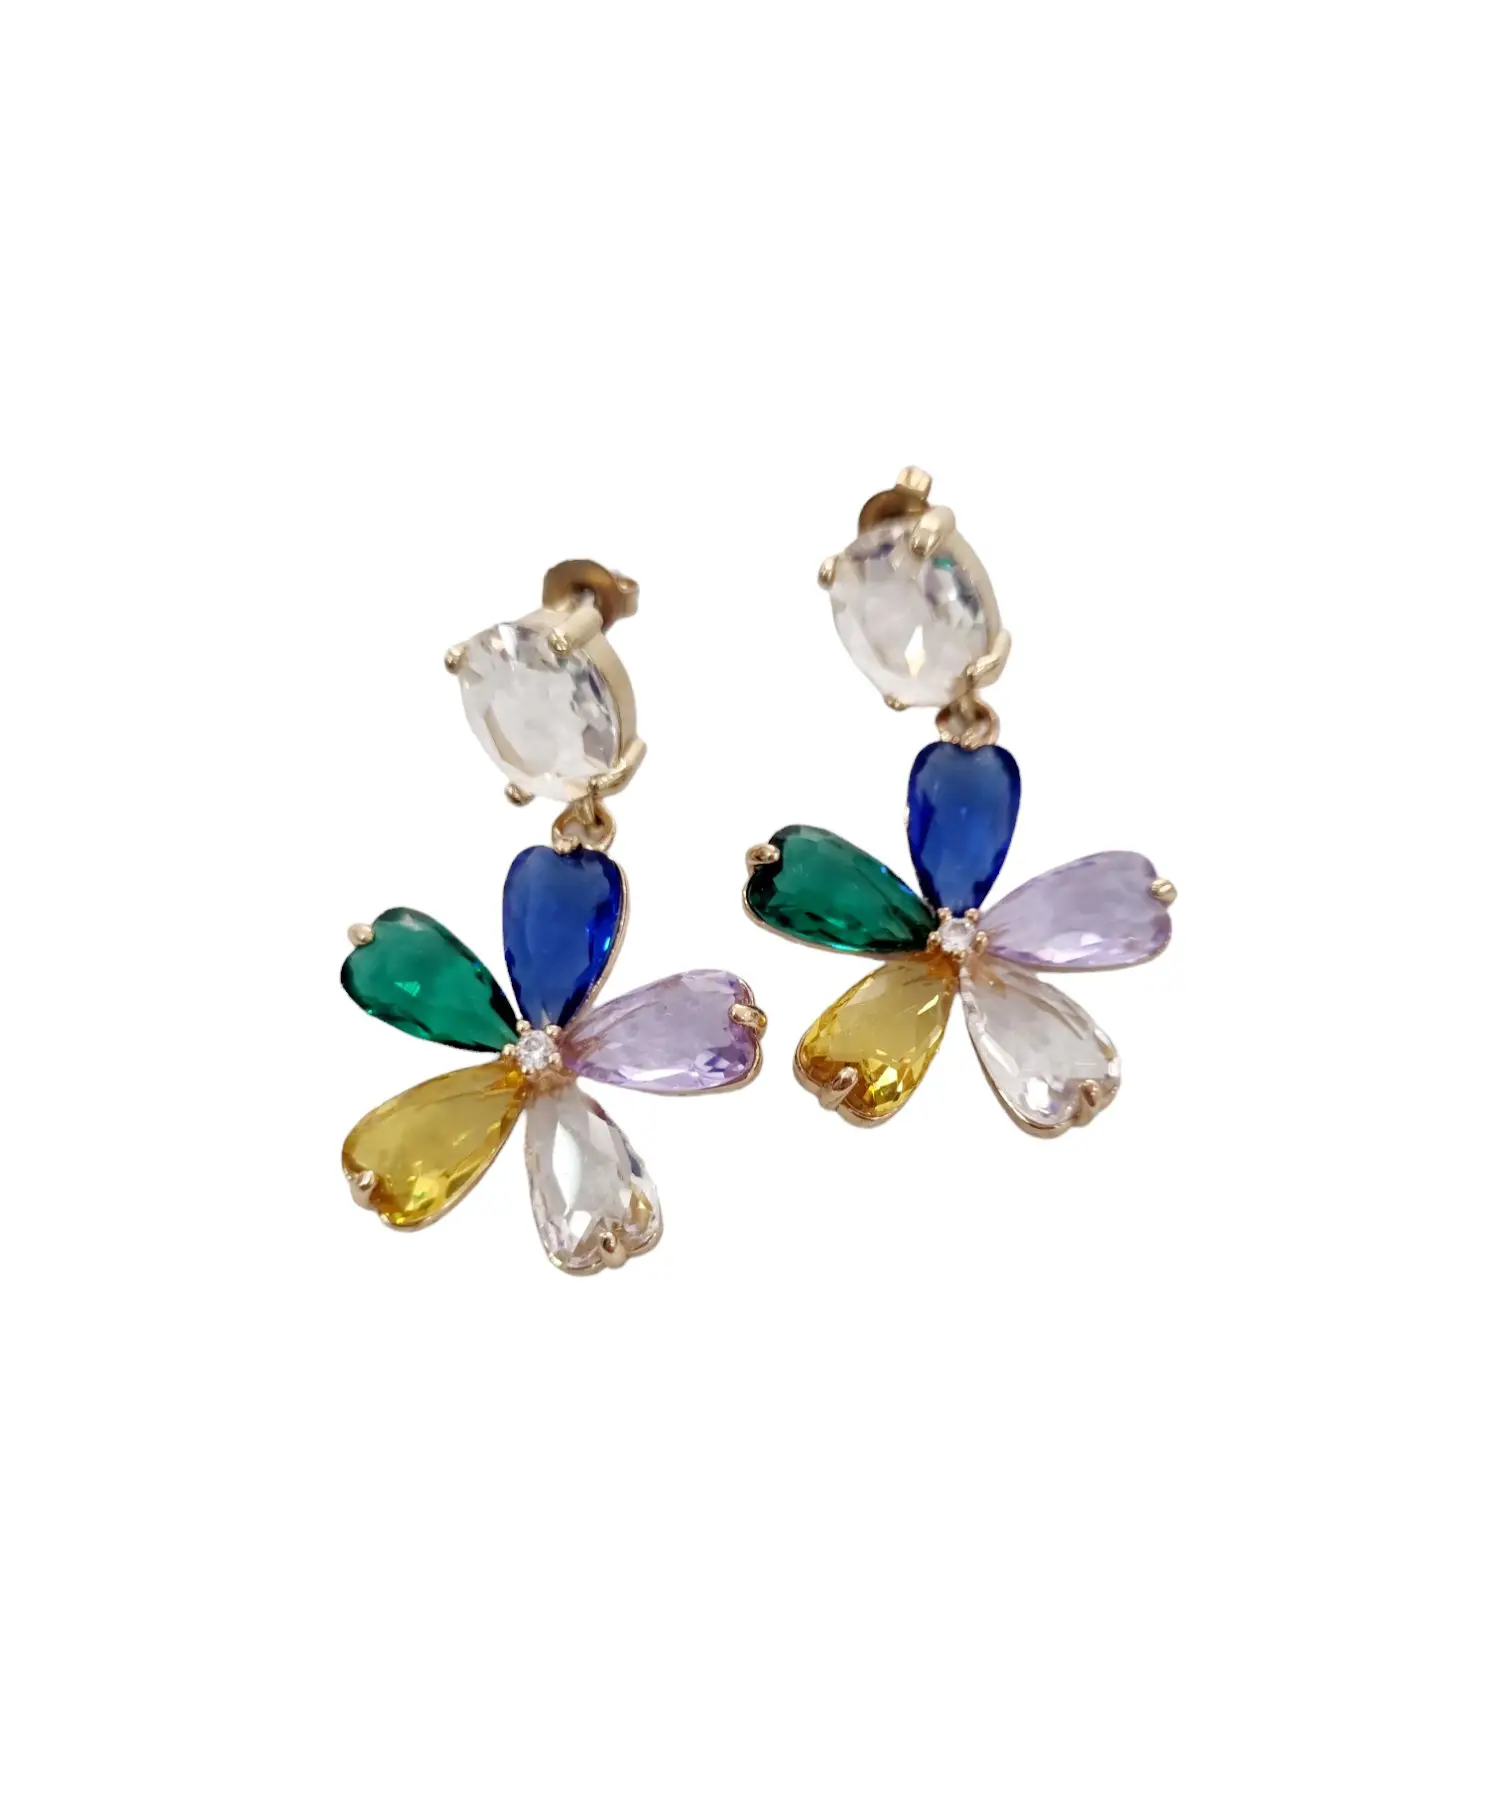 Brass earrings with light points and zircons - Length 3.5 cm - Weight 3.7 g